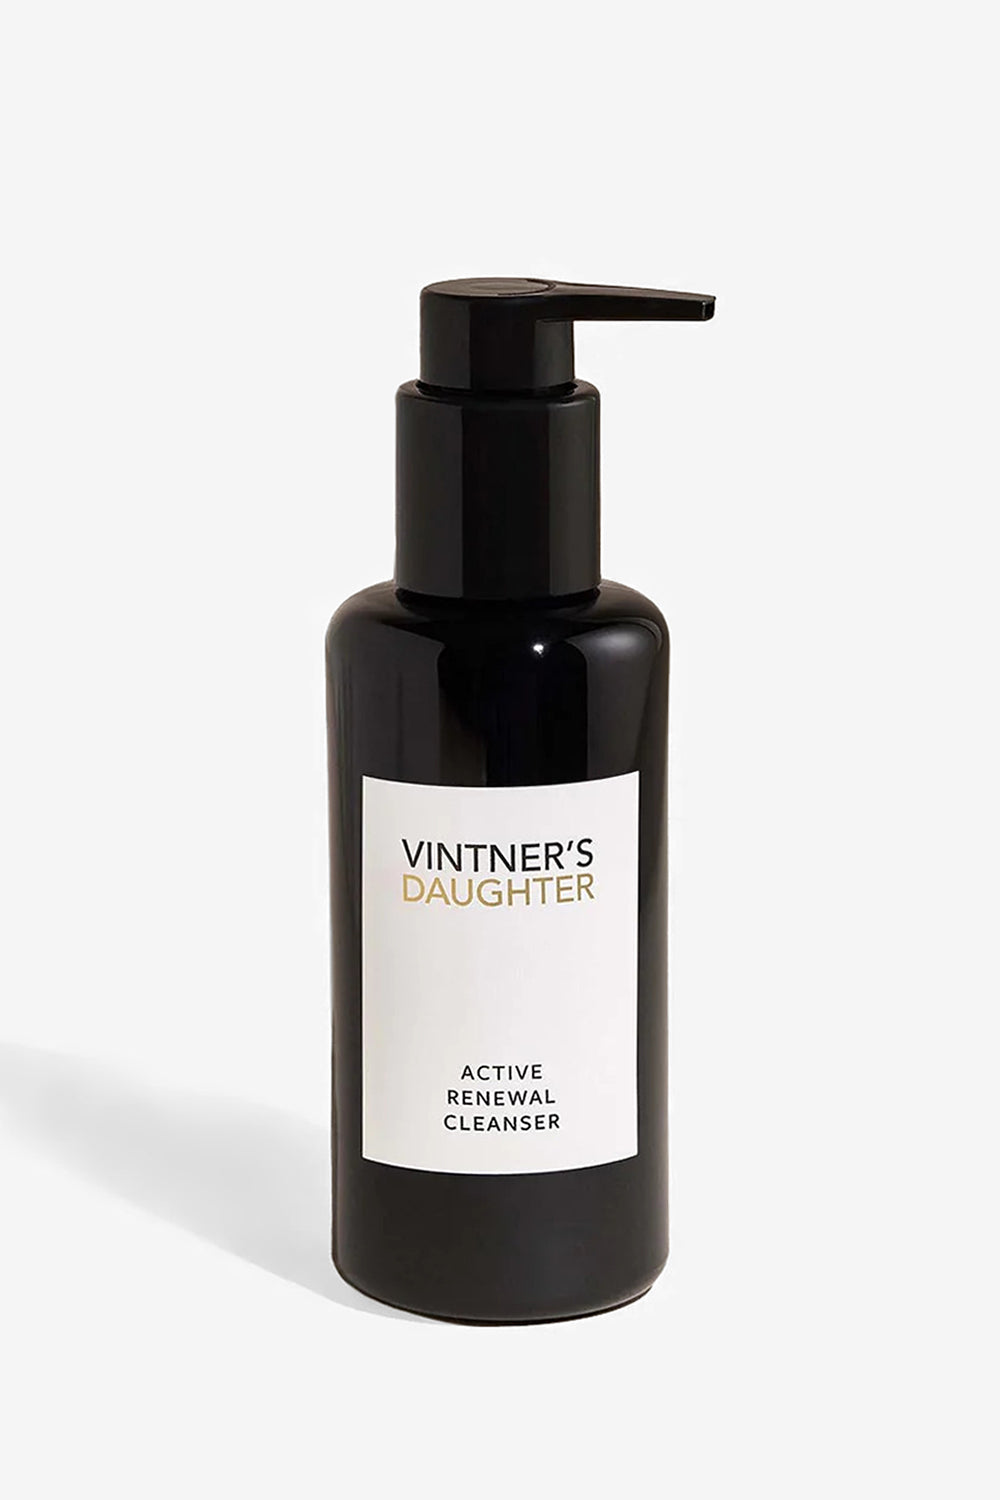 Vintner's Daughter Skincare Active Renewal Cleanser. Made with natural ingredients. 